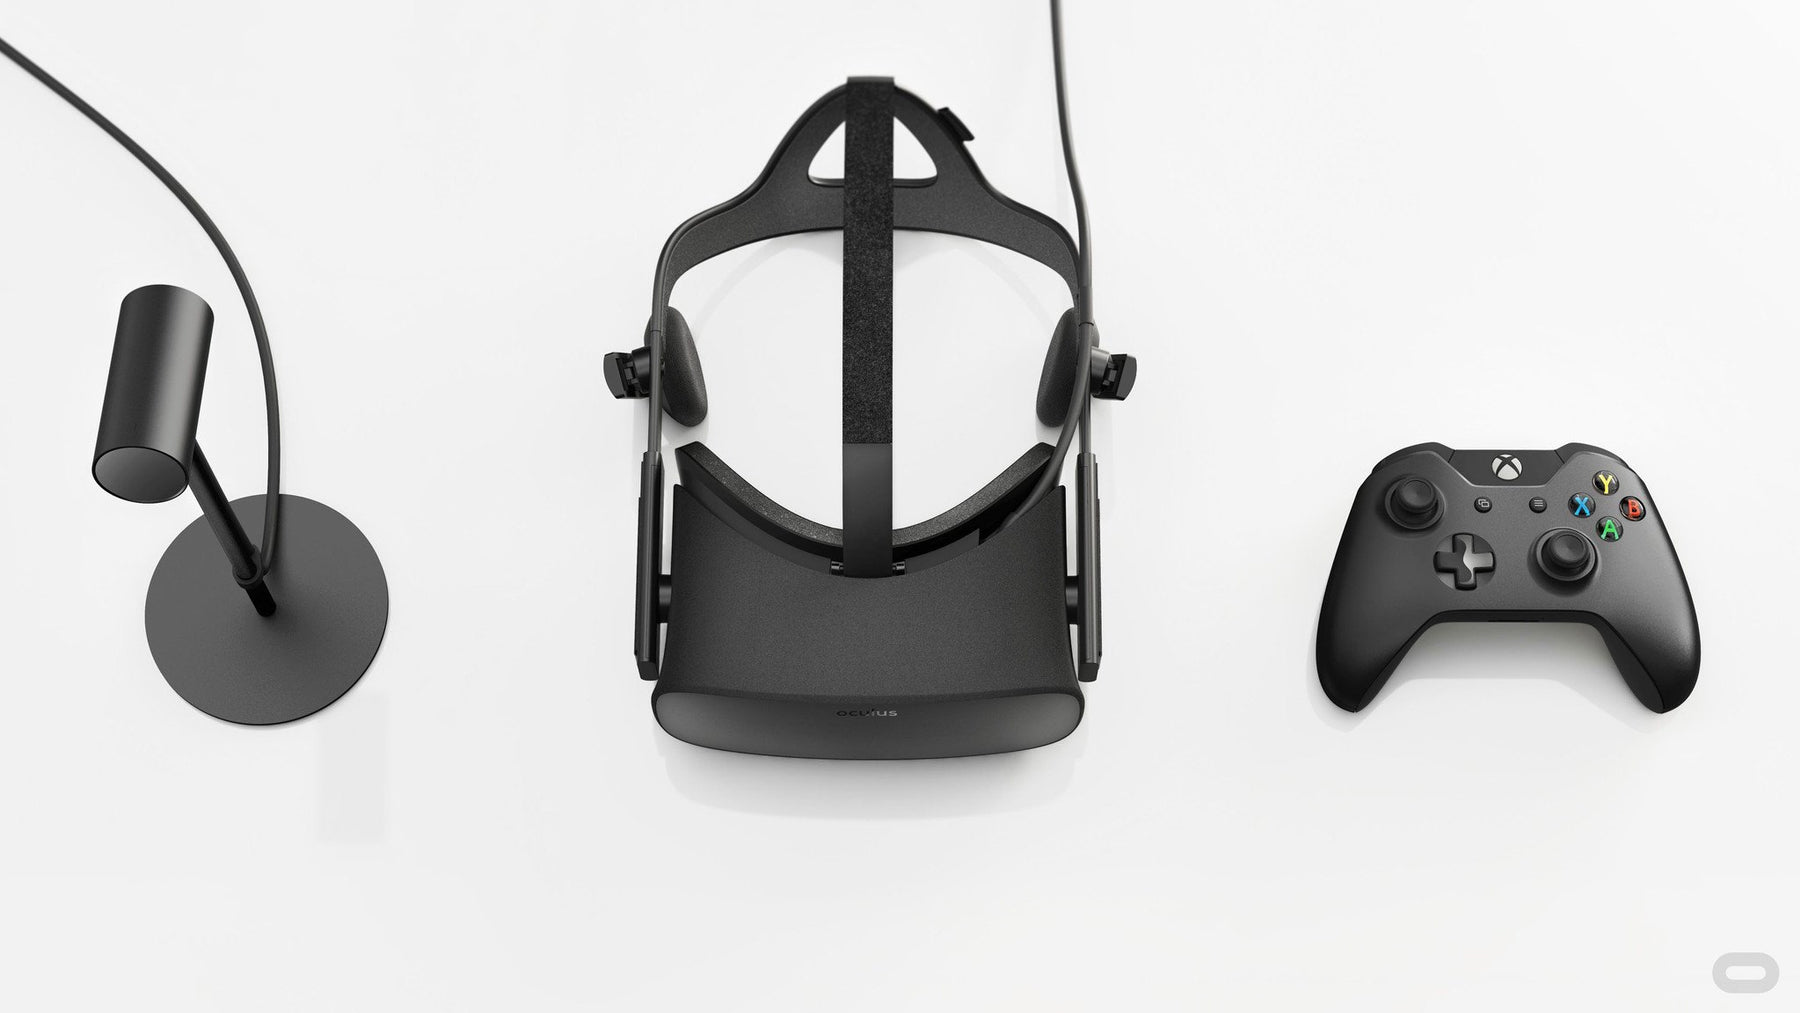 Why You Need Foam Inserts for Your Oculus Rift VR System Sooner-Cobra Foam Inserts and Cases